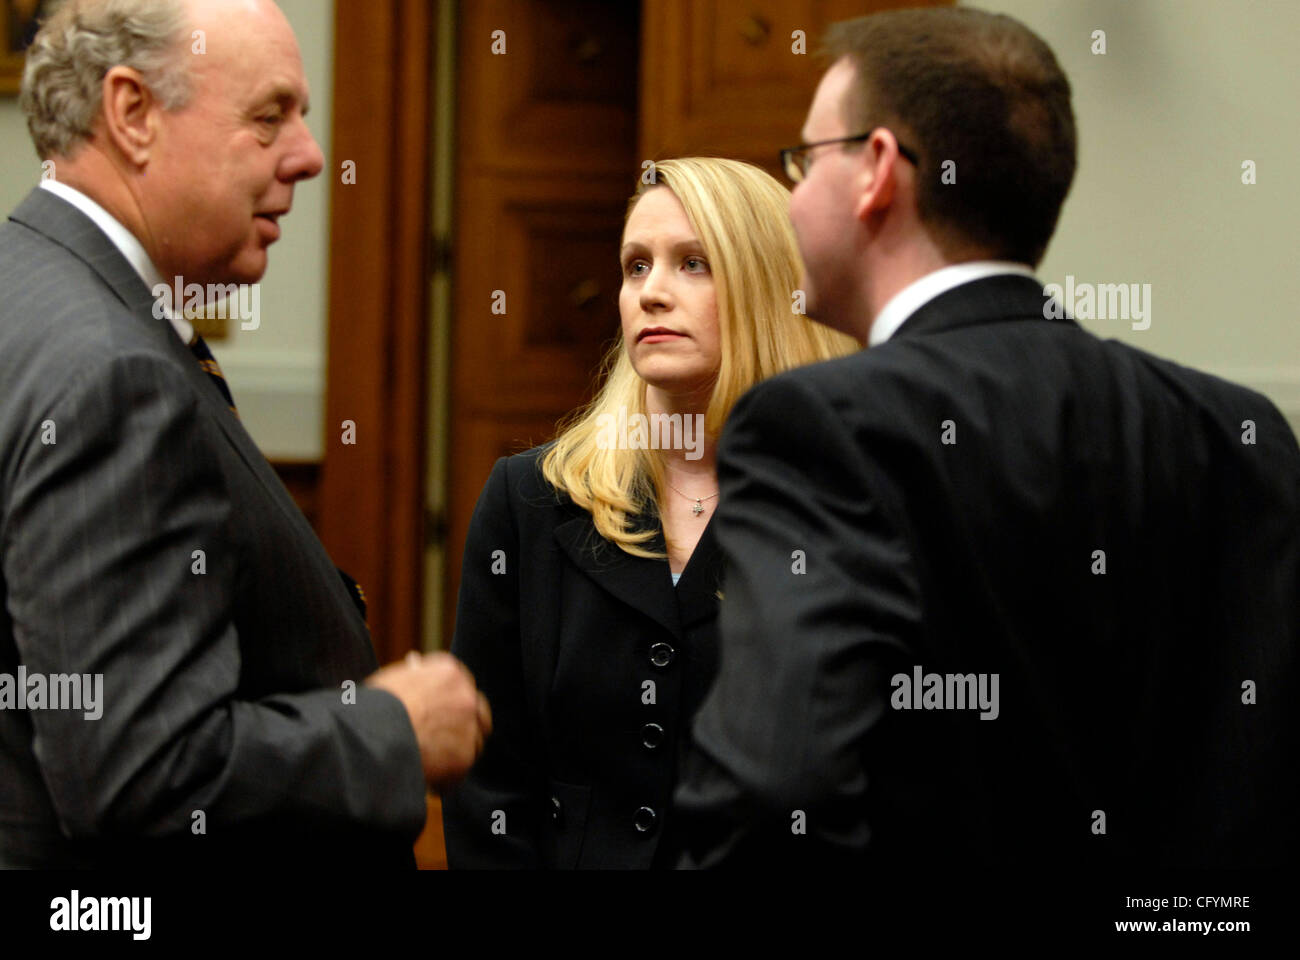 May 23, 2007 - Washington, DC, USA - Former Justice Department liaison to the White House, MONICA GOODLING, meets with her lawyer, JOHN DOWD (left) prior to testifying before the House Judiciary committee about her role in the firing of US attorneys in late 2006 and early 2007. Goodling denied taken Stock Photo